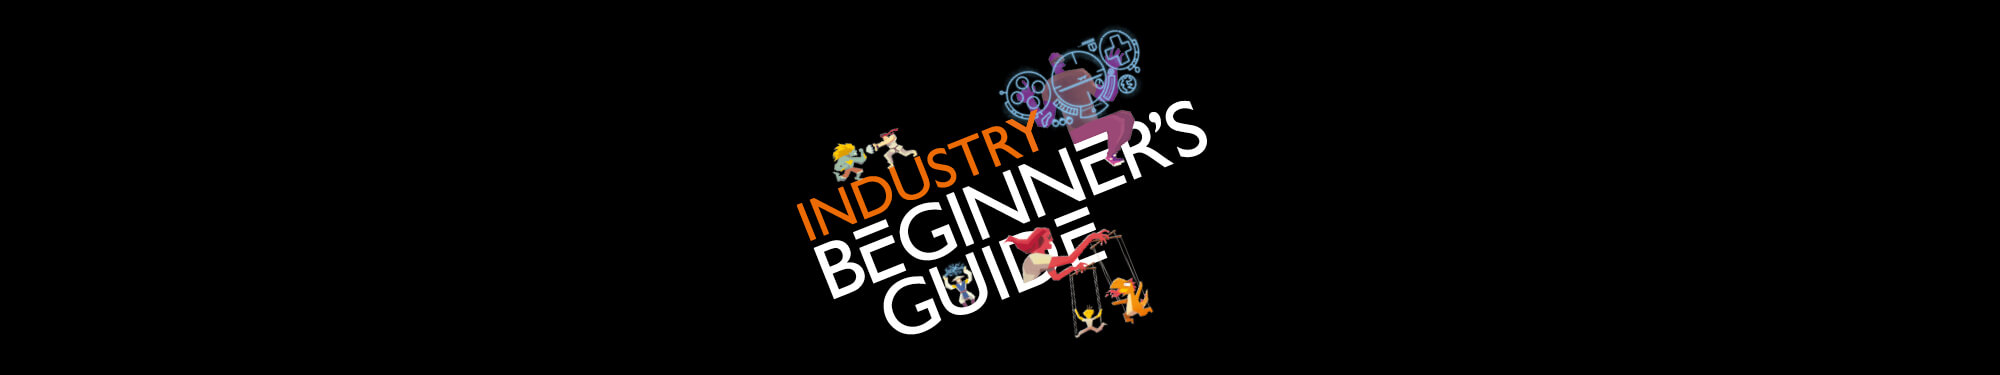 Industry Beginners guide for VFX, Animation, Game art & Motion graphics